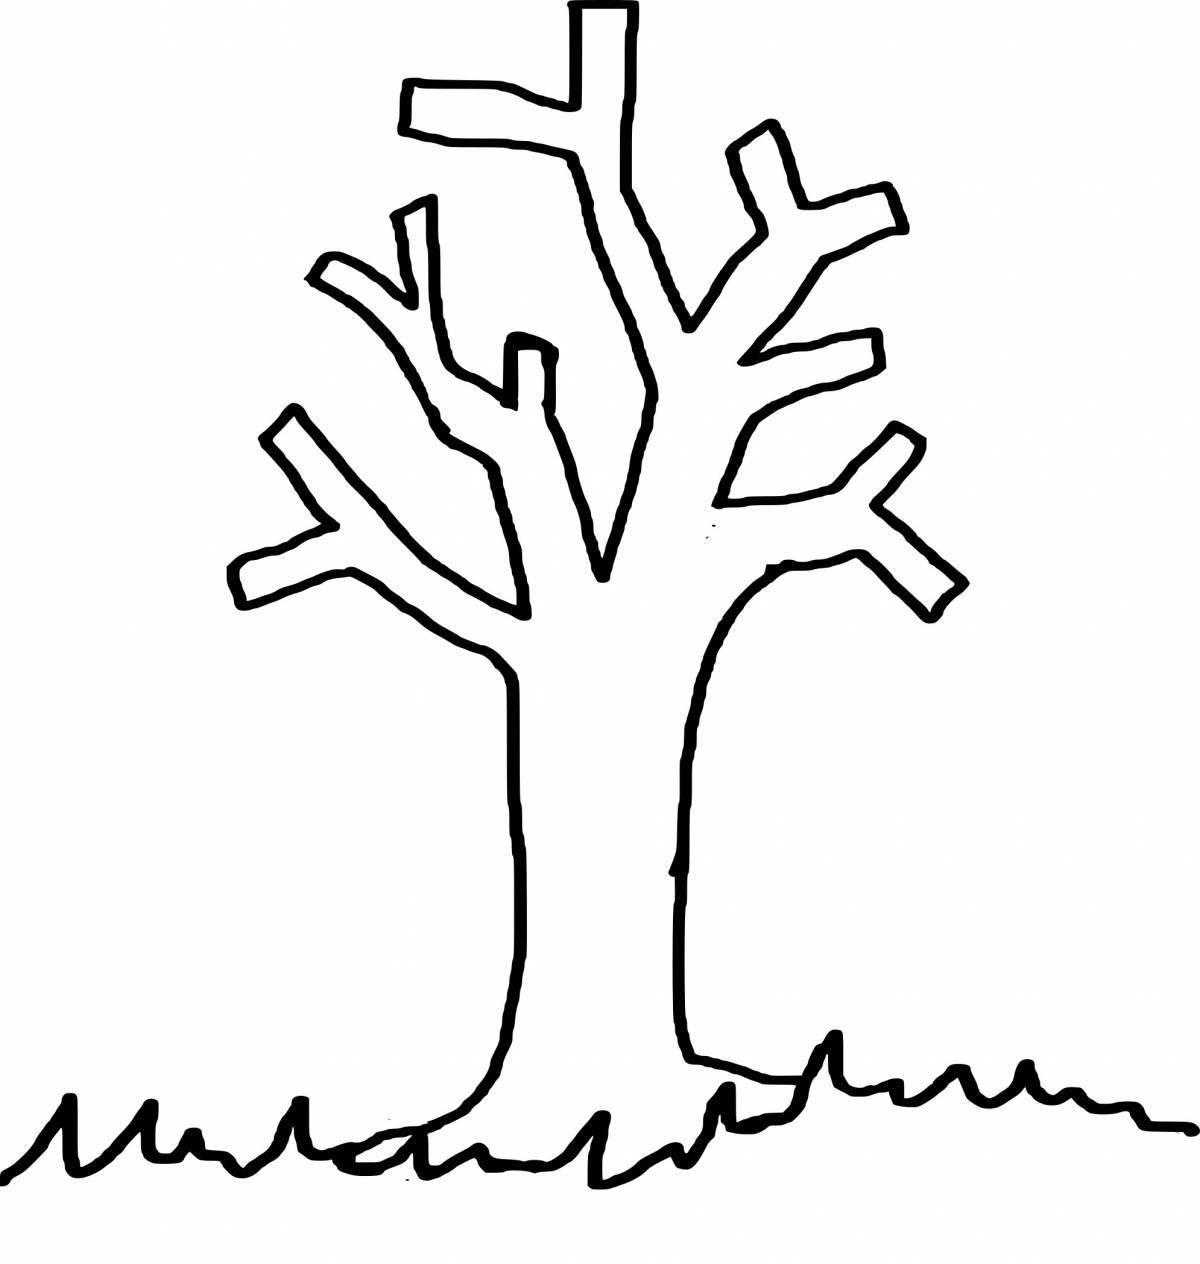 Adorable tree trunk coloring book for kids